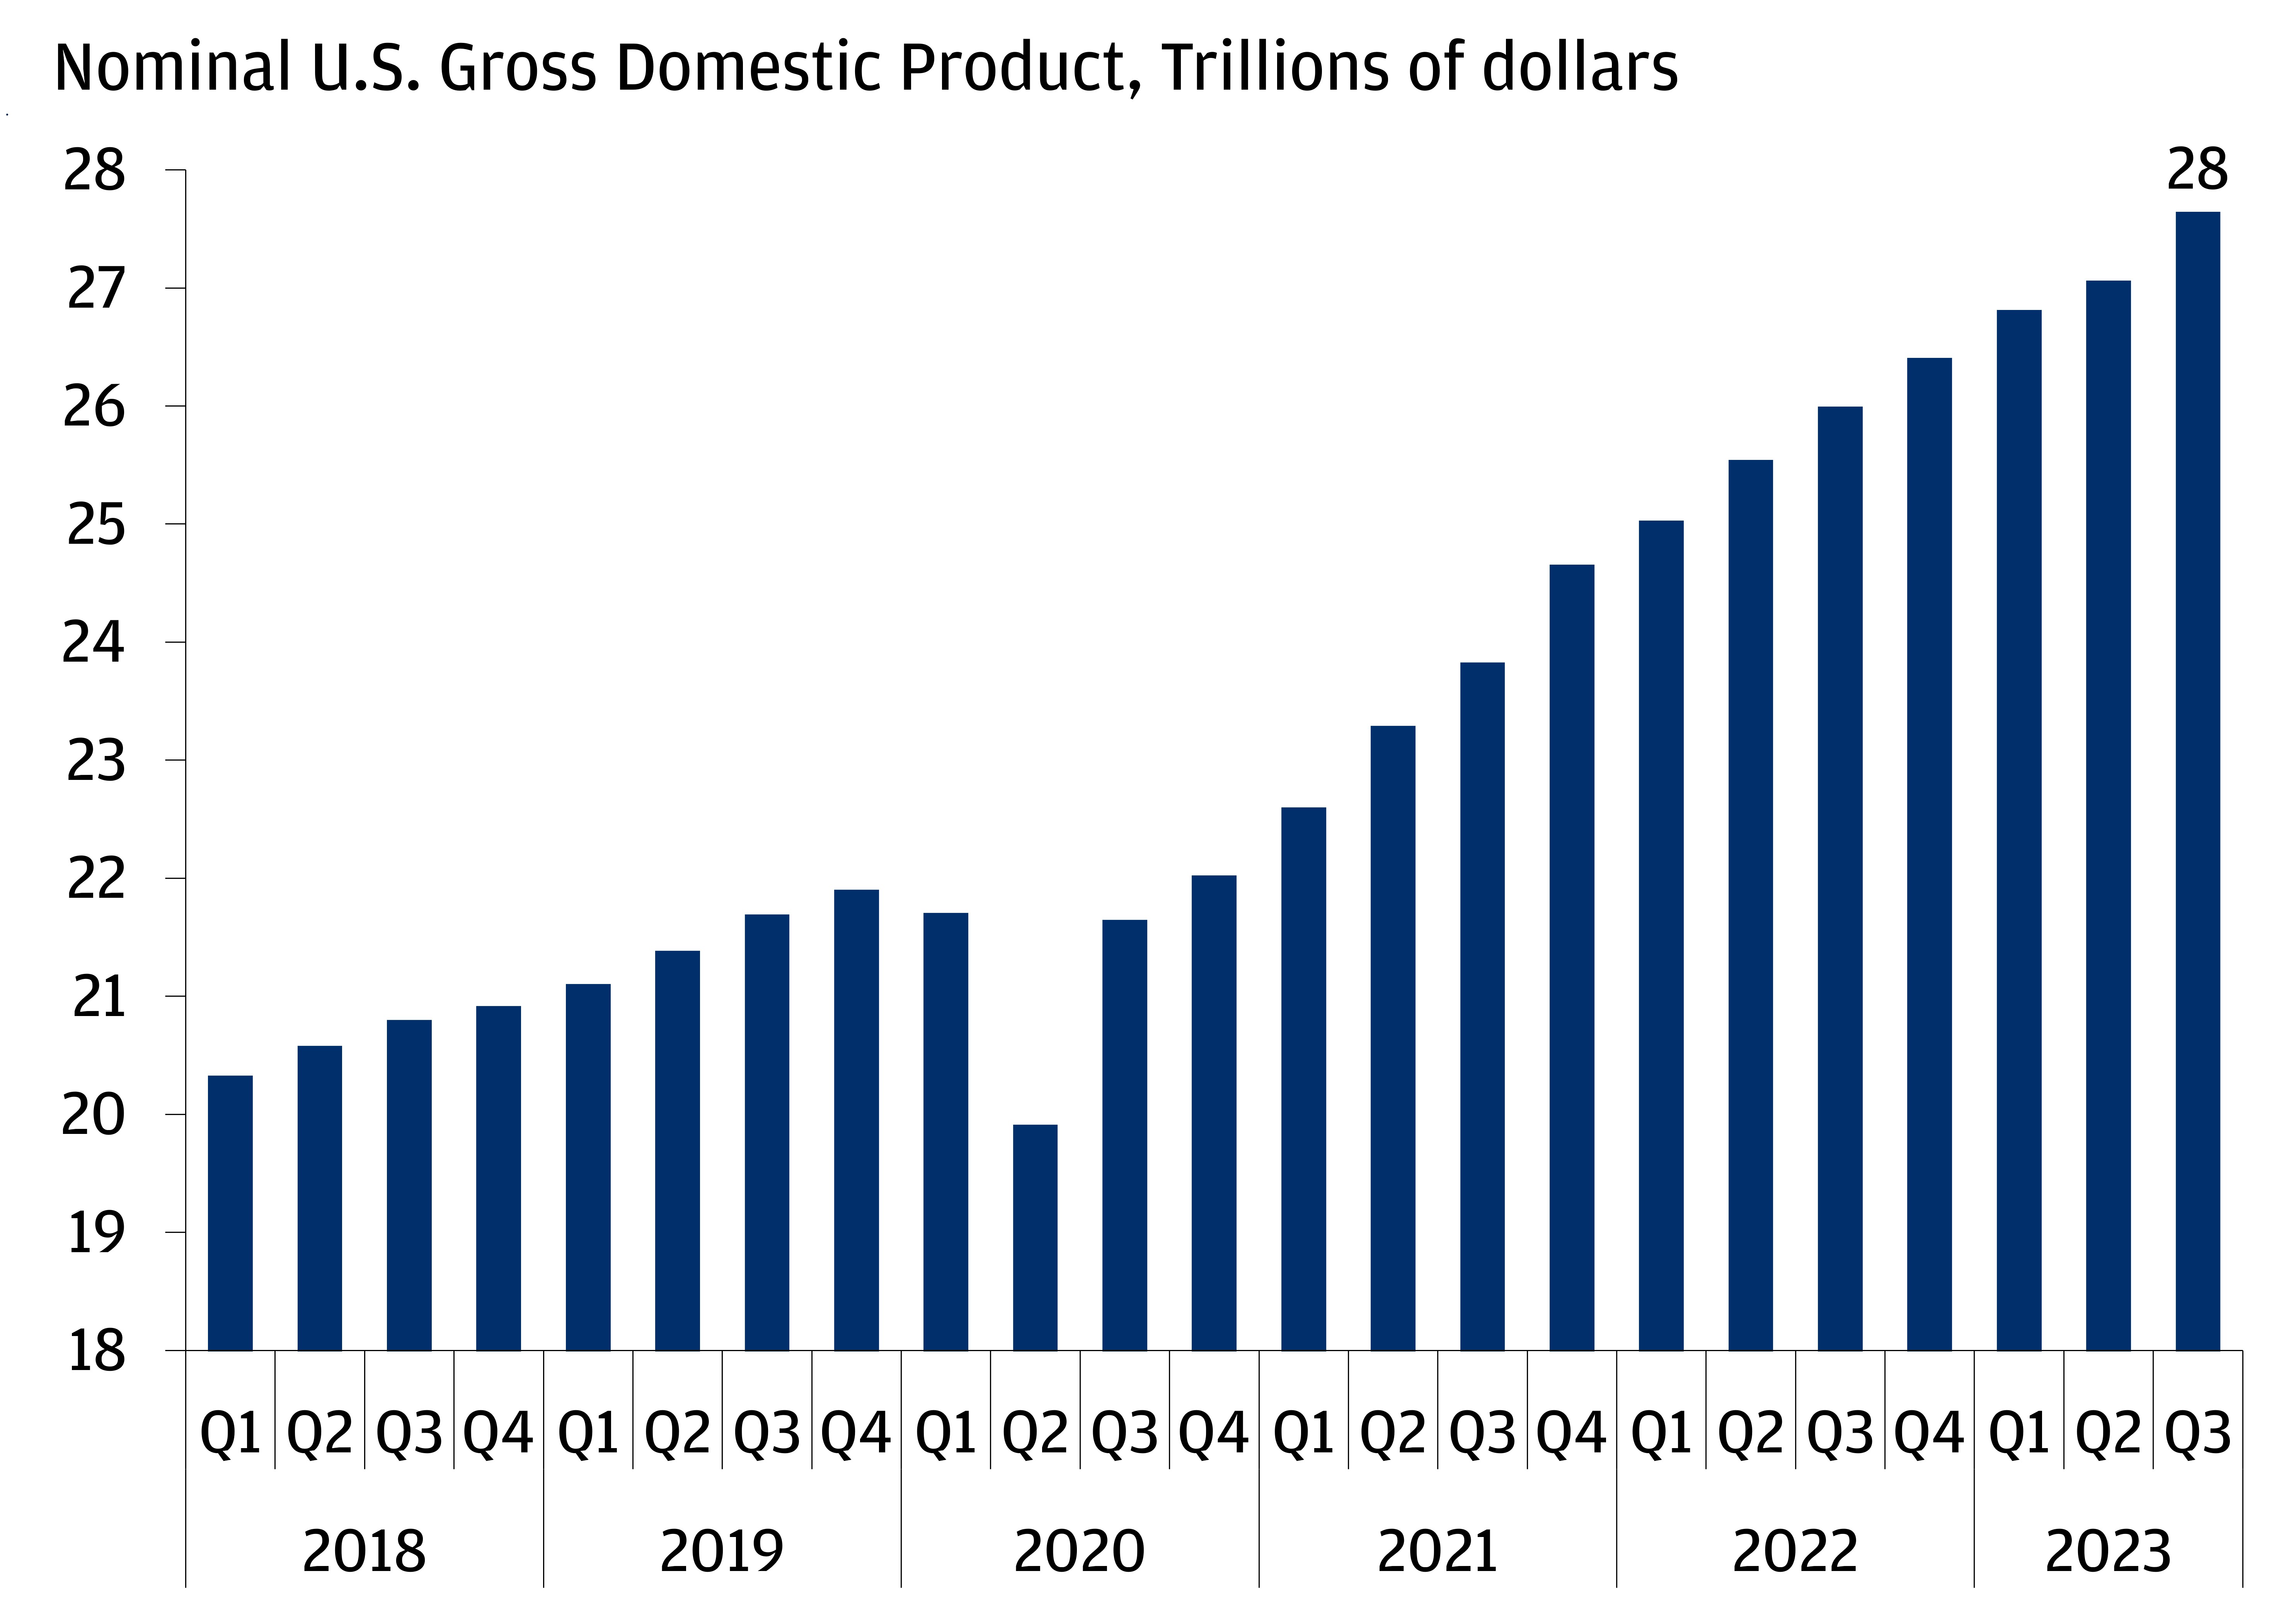 This graph shows the U.S. economy was resilient in 2023 by the nominal U.S. gross domestic product, trillions of dollars.